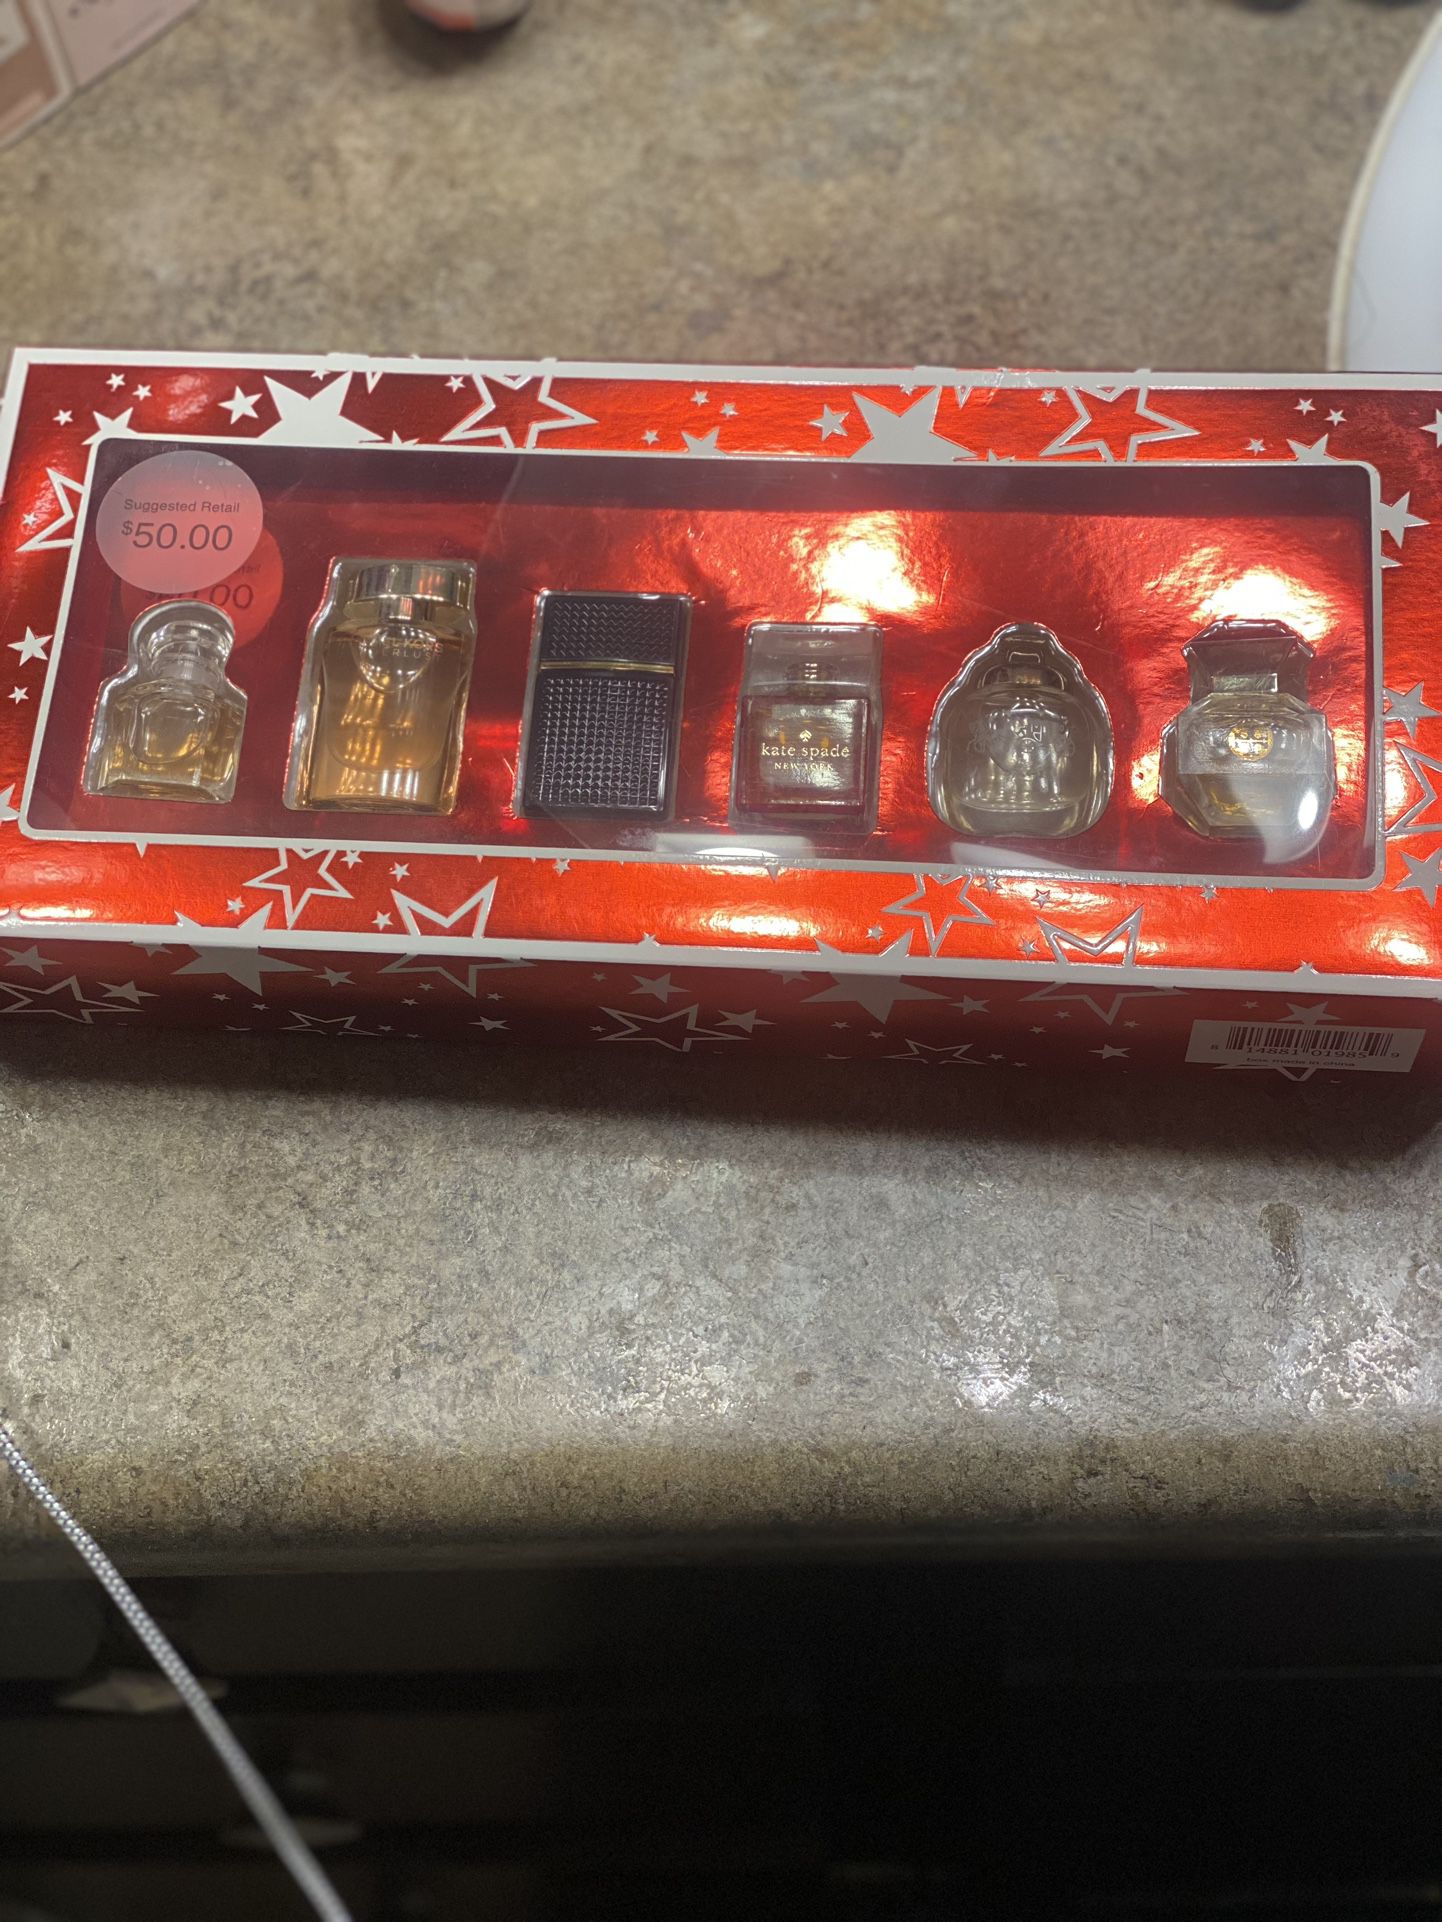 Perfume Set Of 5 For Sale $20 Brand New Pick Up Pearland texas 